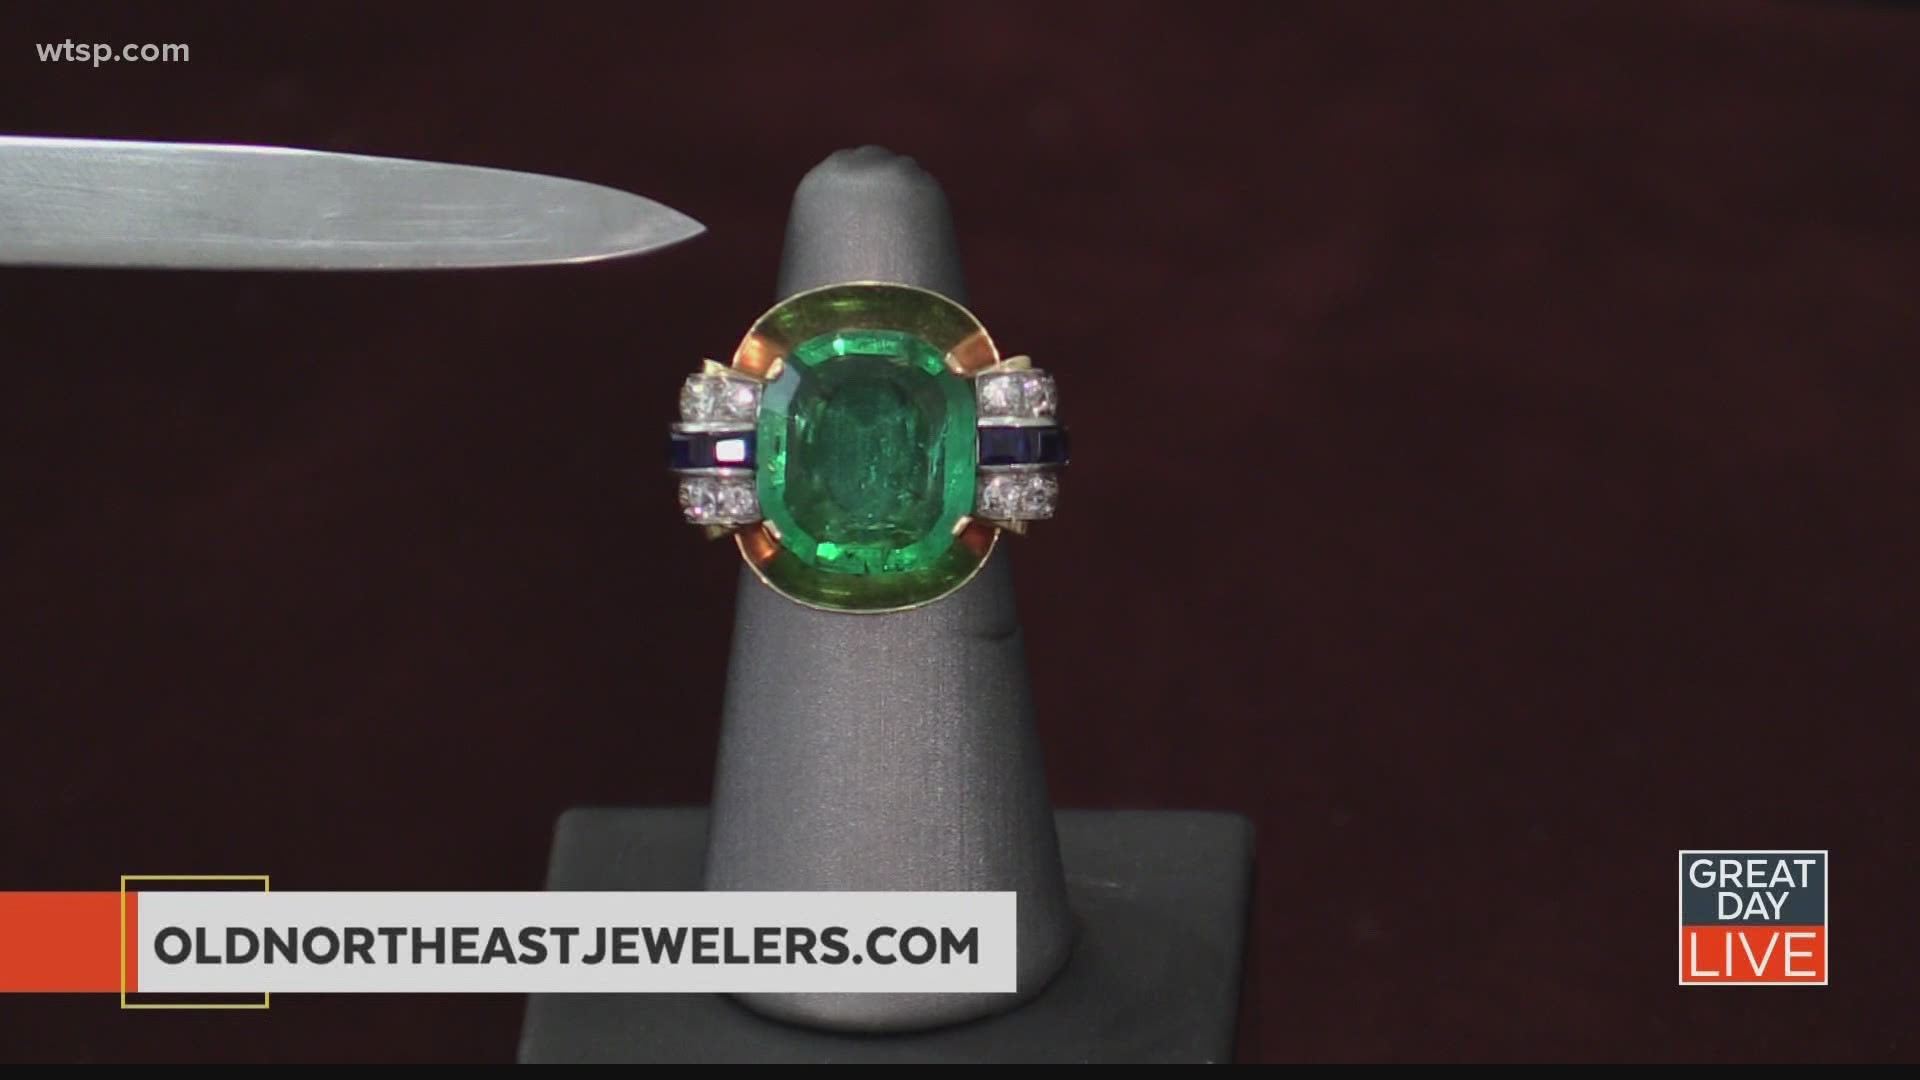 Paid content:  Sponsored by Old Northeast Jewelers